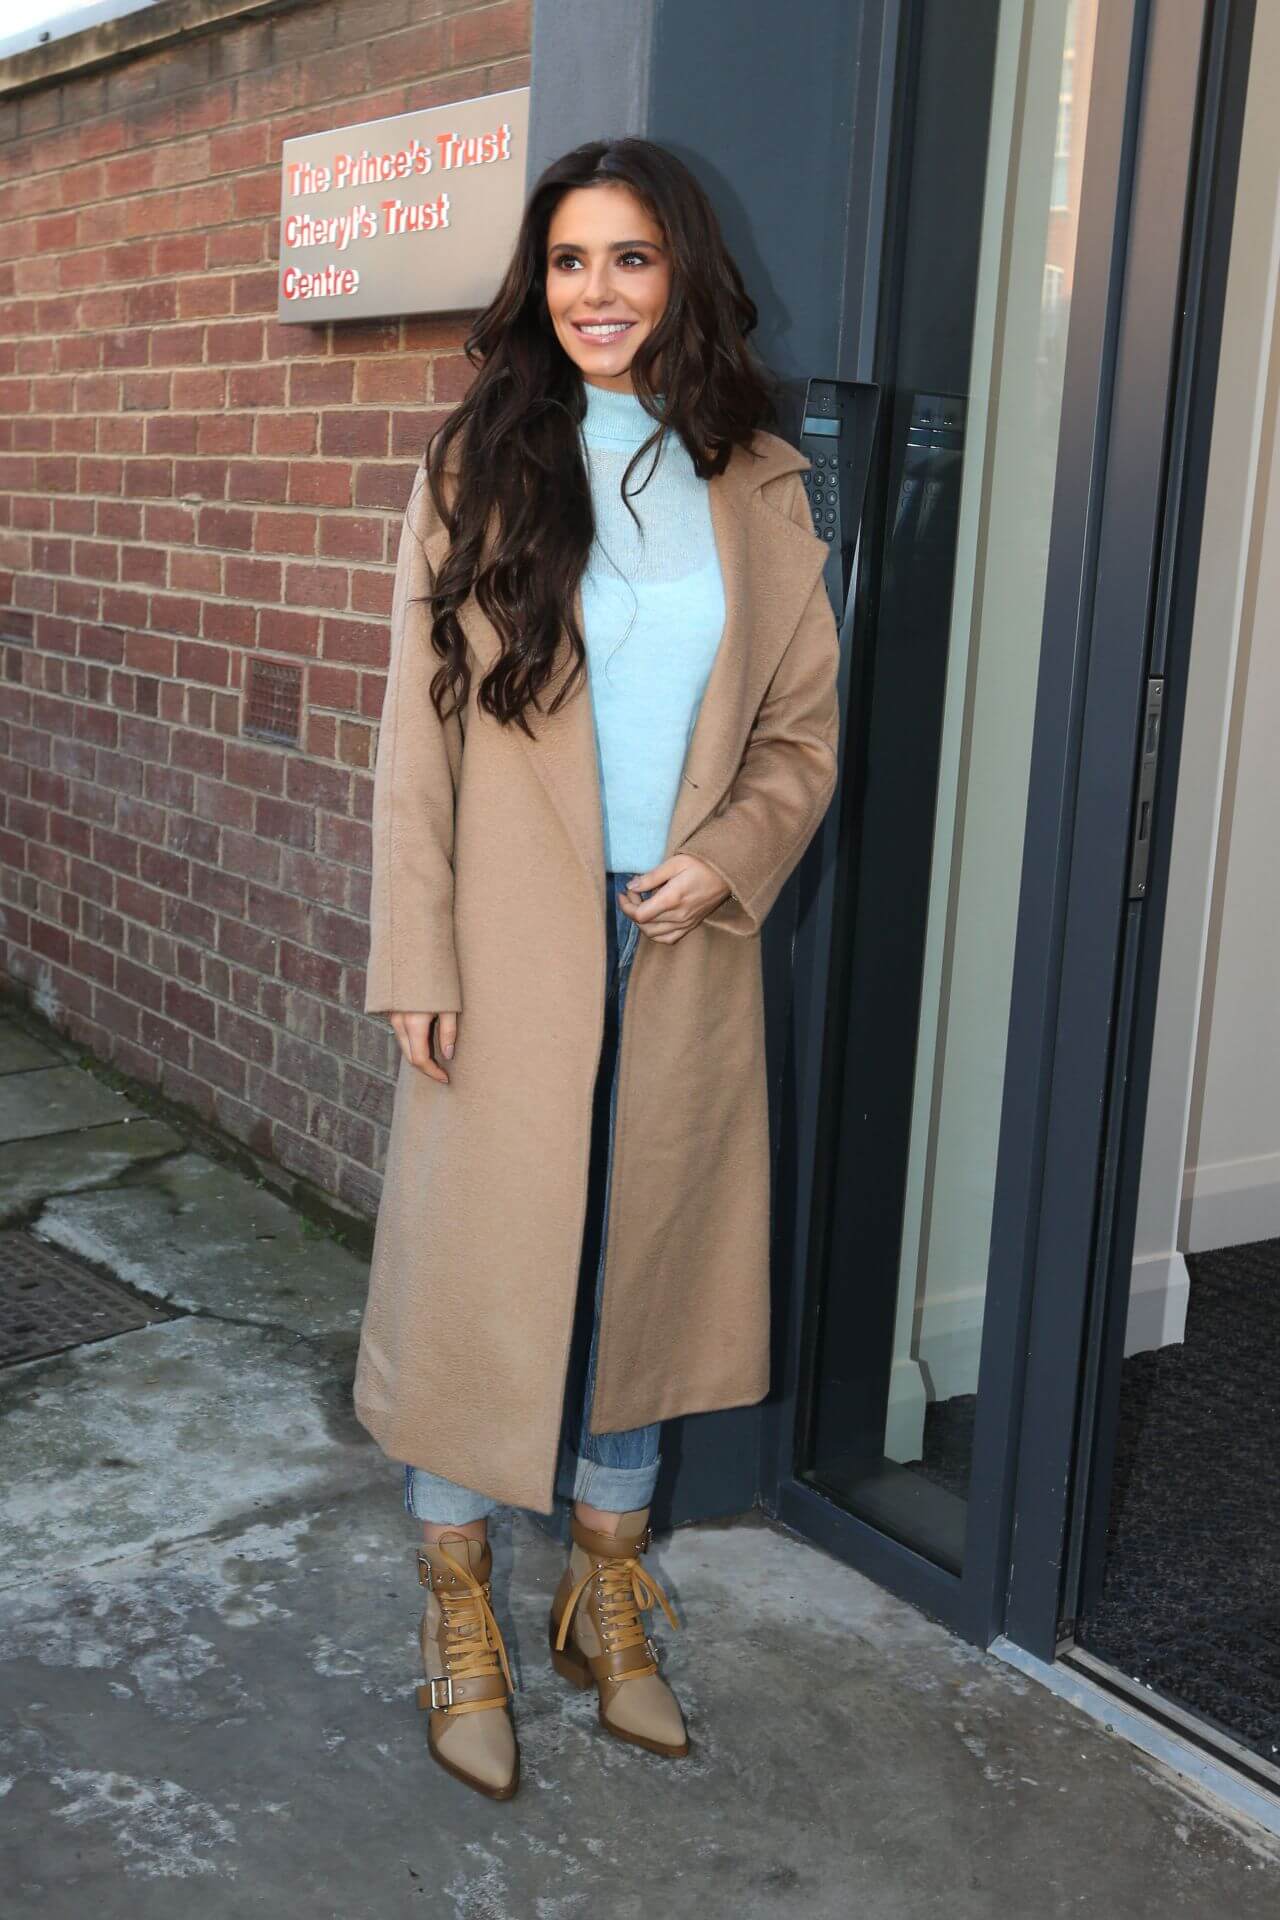 Cheryl Cole In Beige Long Overcoat Under Blue Top & Jeans  Arriving at The Prince’s Trust Cheryl’s Trust in Newcastle